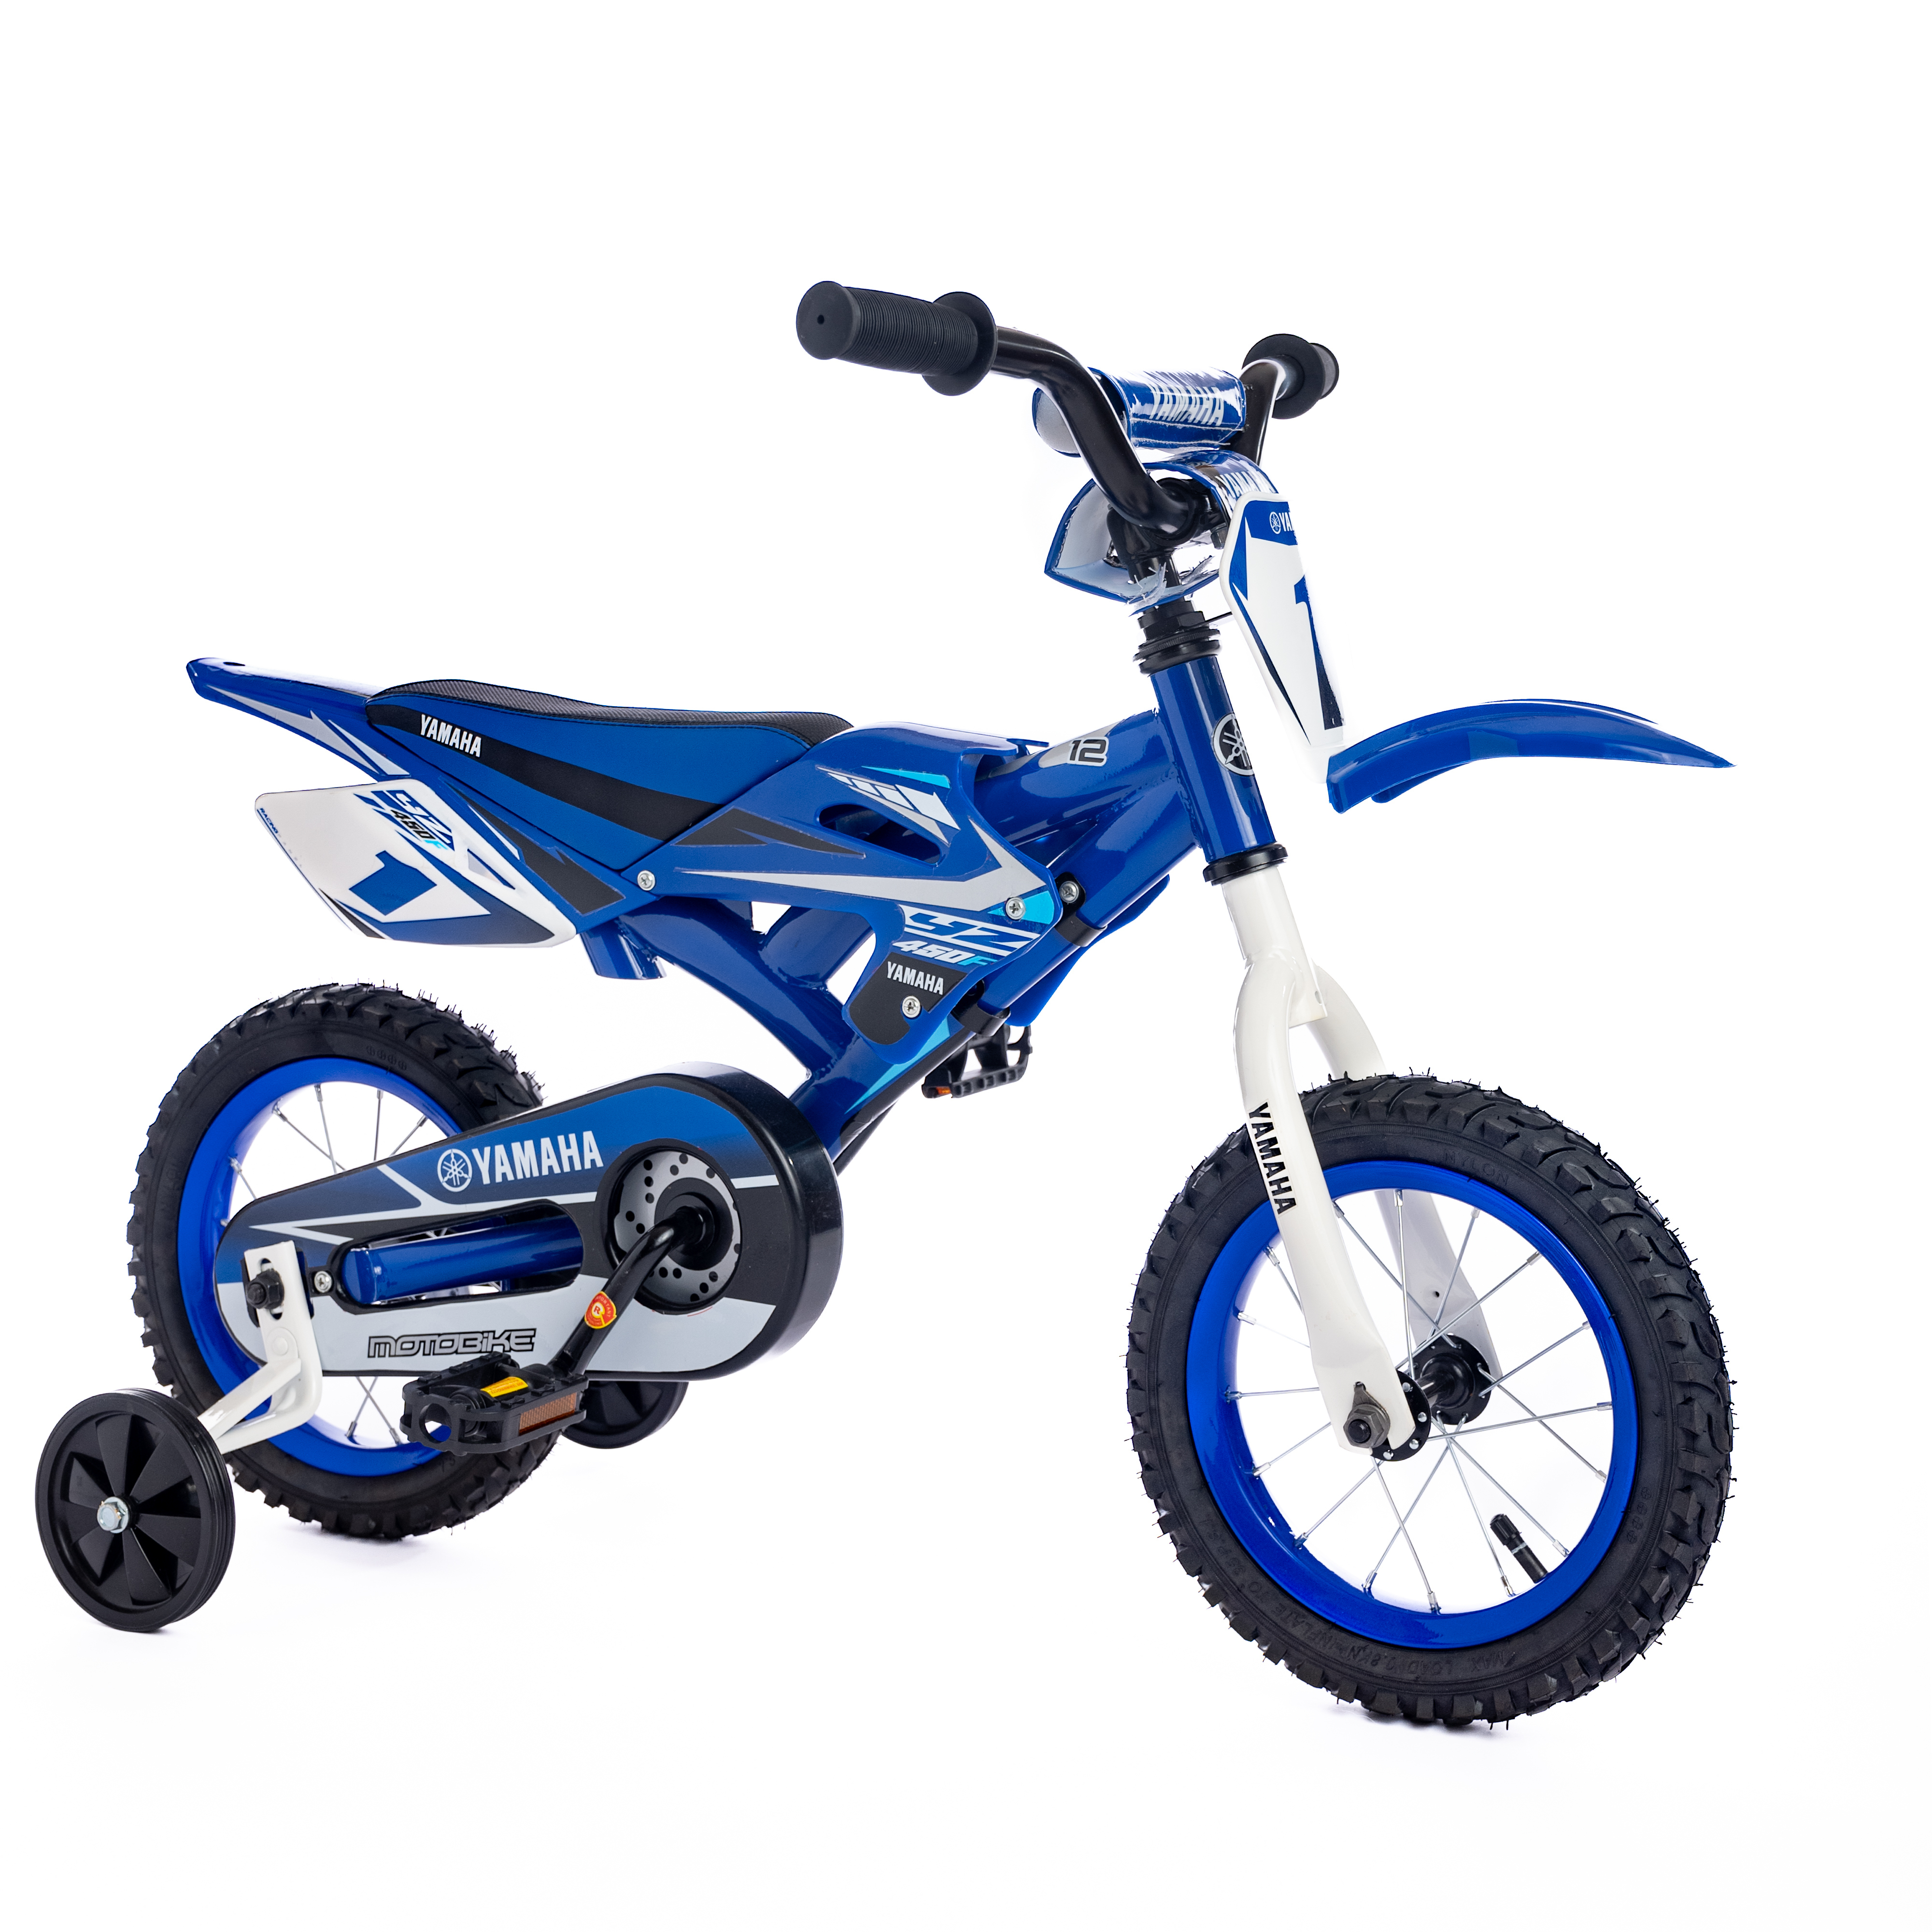 12in Yamaha Motobike for children age 2 to 4 Years old - image 1 of 11